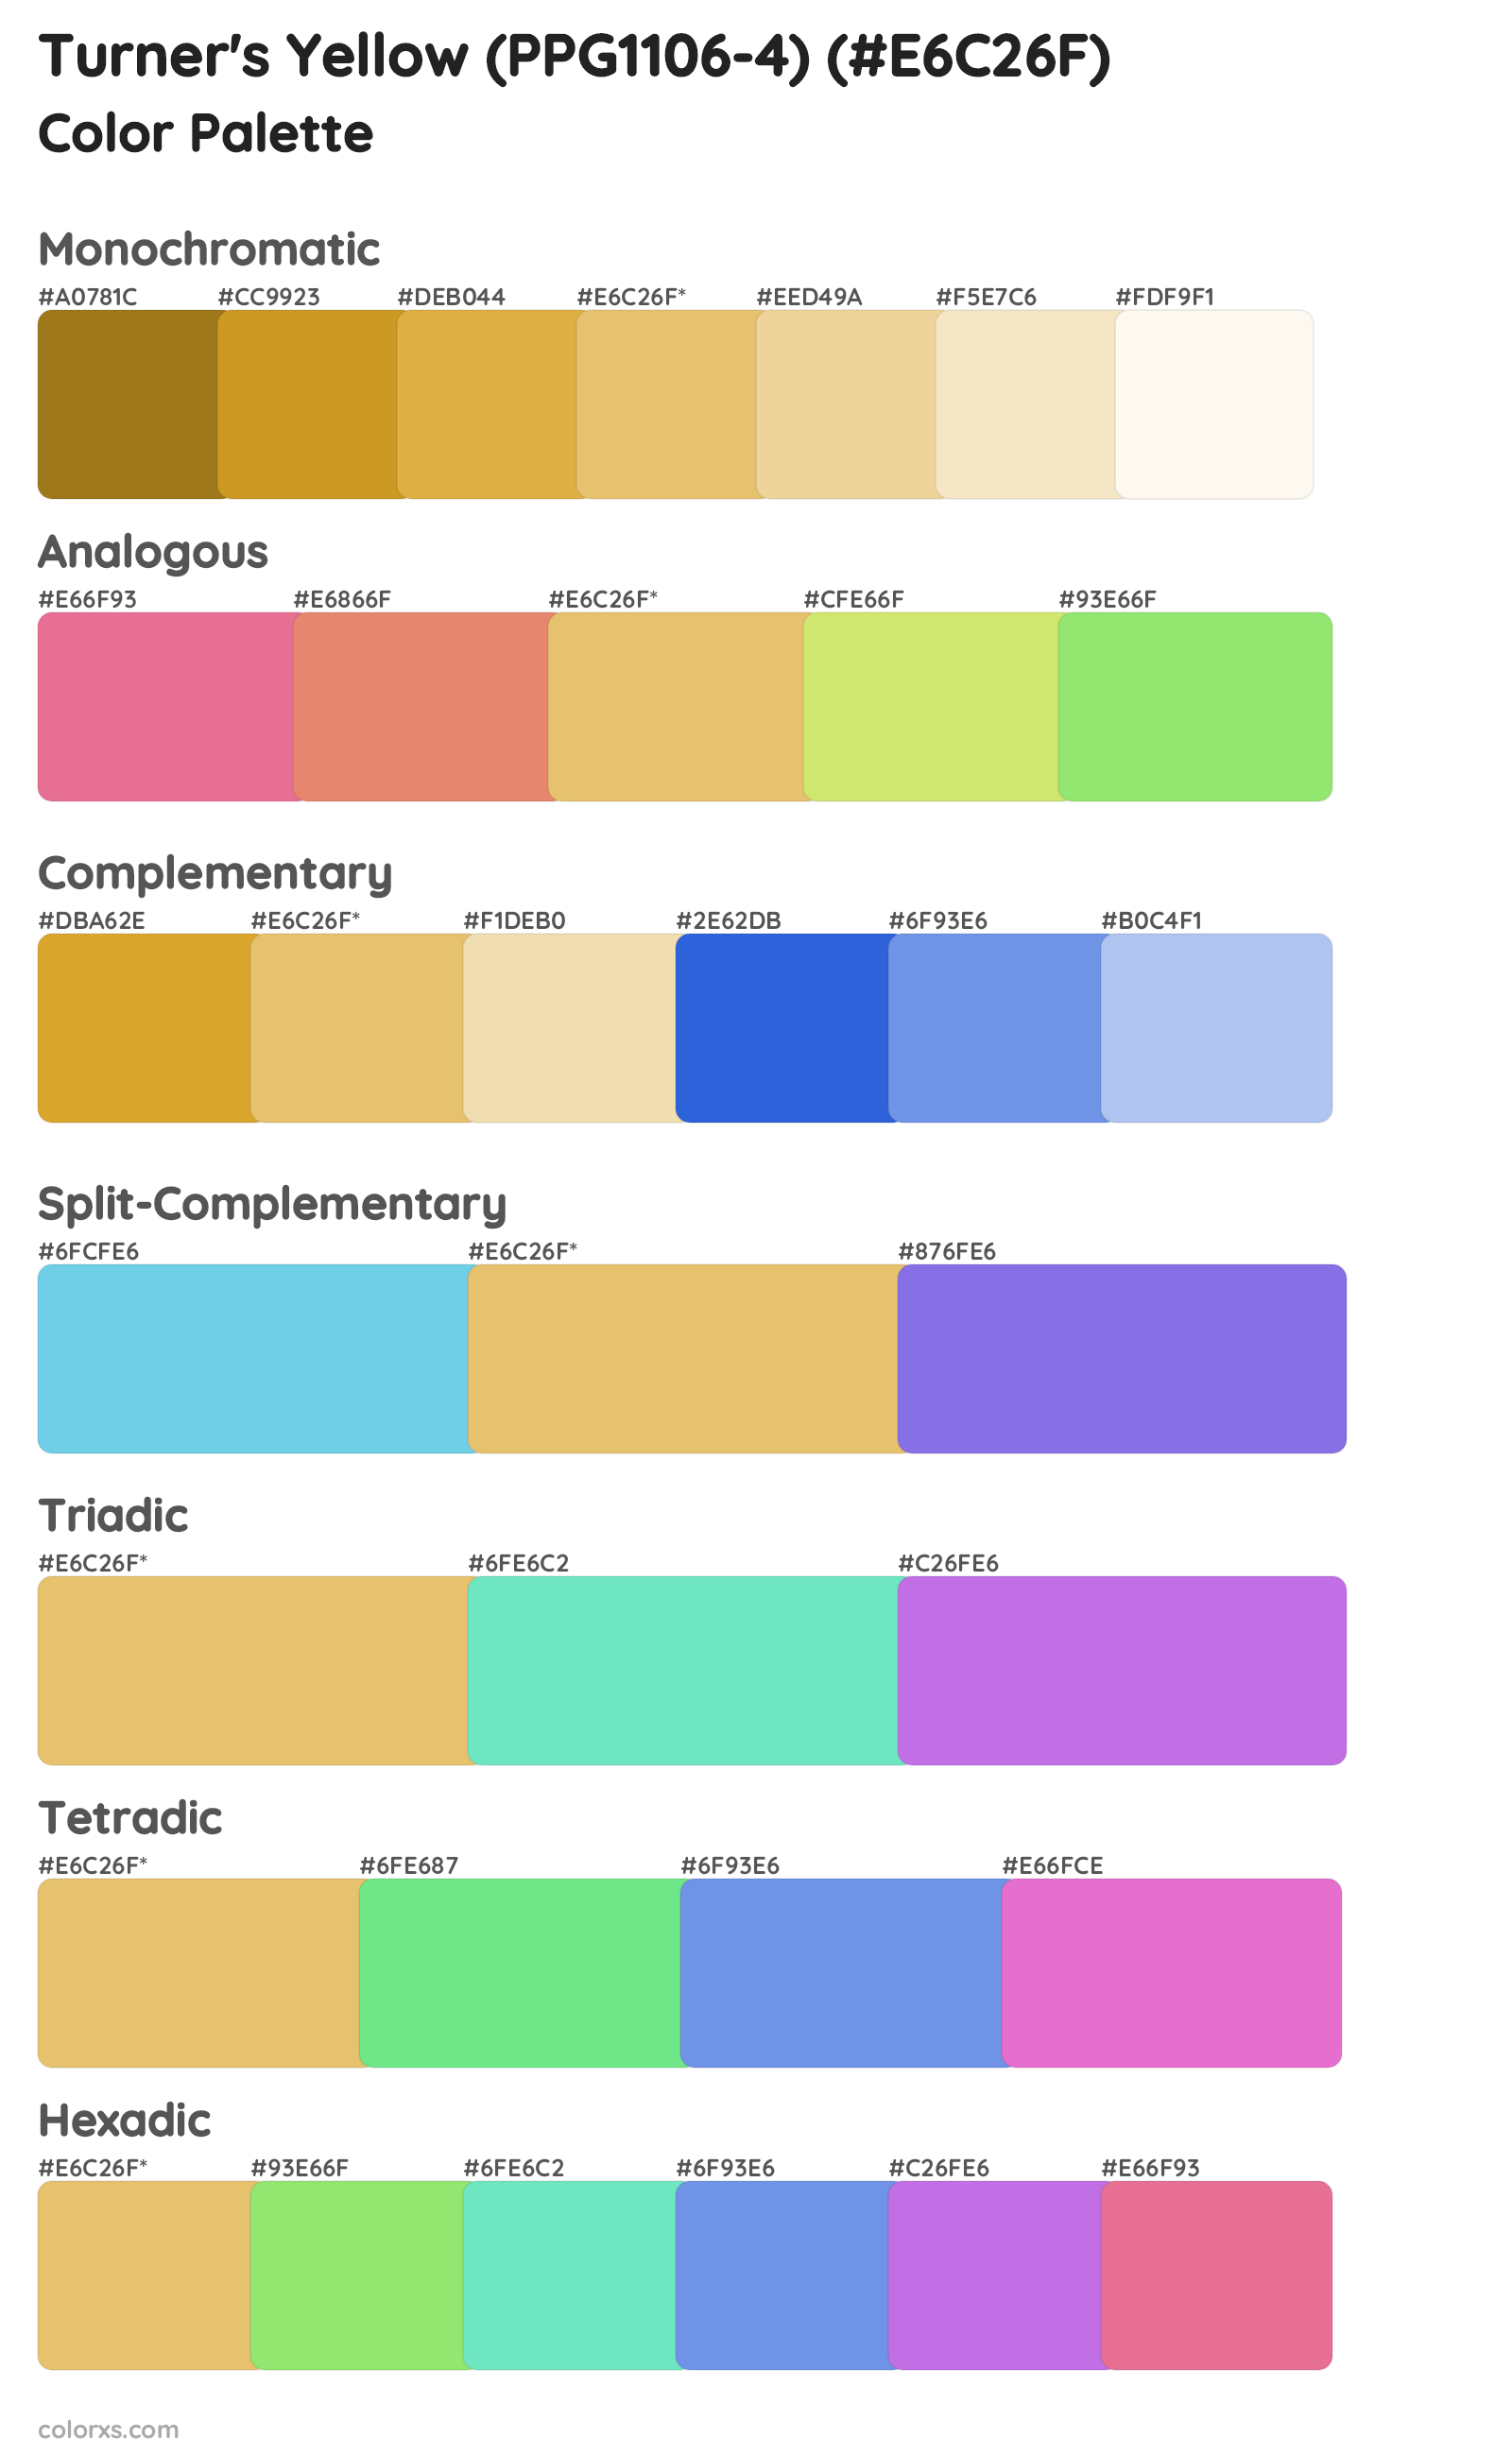 Turner's Yellow (PPG1106-4) Color Scheme Palettes